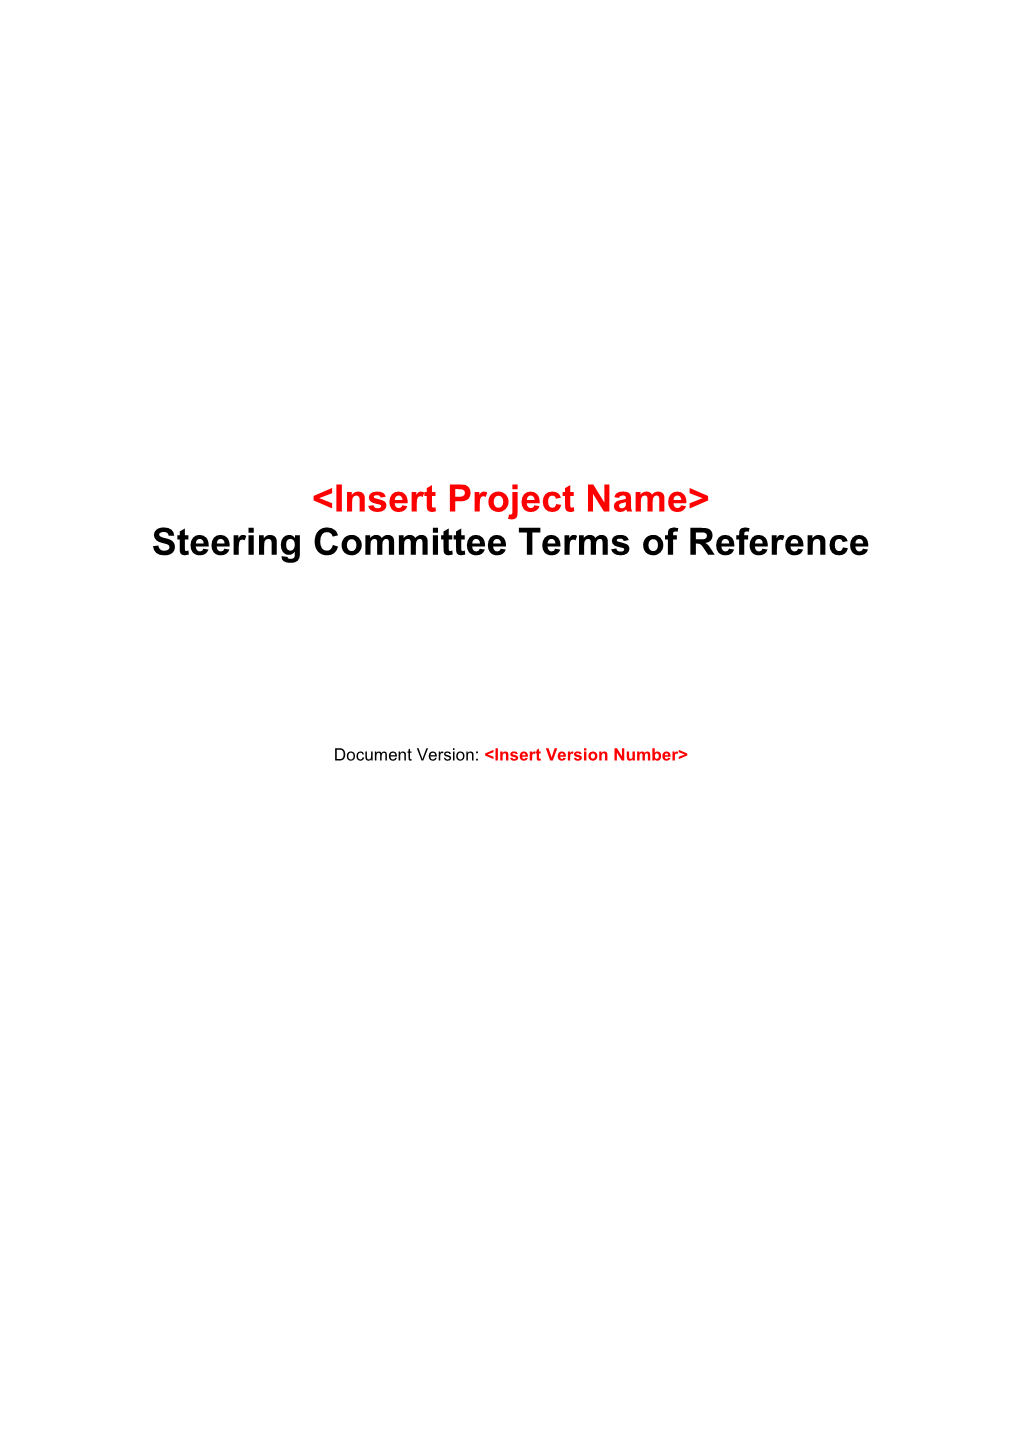 &lt;Insert Project Name&gt; Steering Committee Terms of Reference